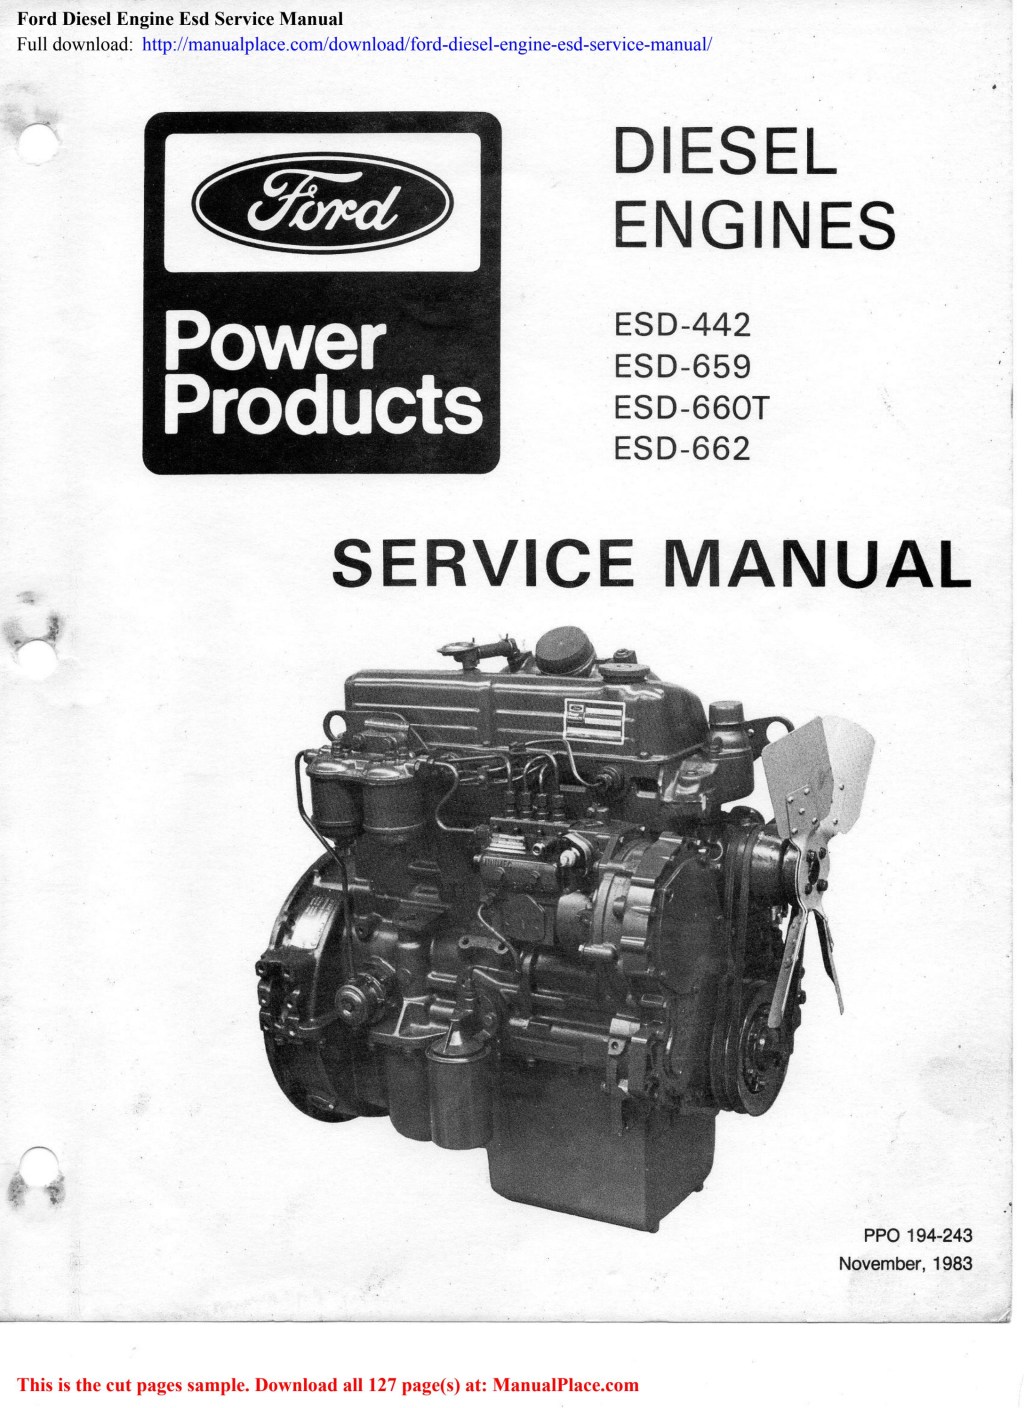 Picture of: Ford Diesel Engine Esd Service Manual by DanitaYut – Issuu